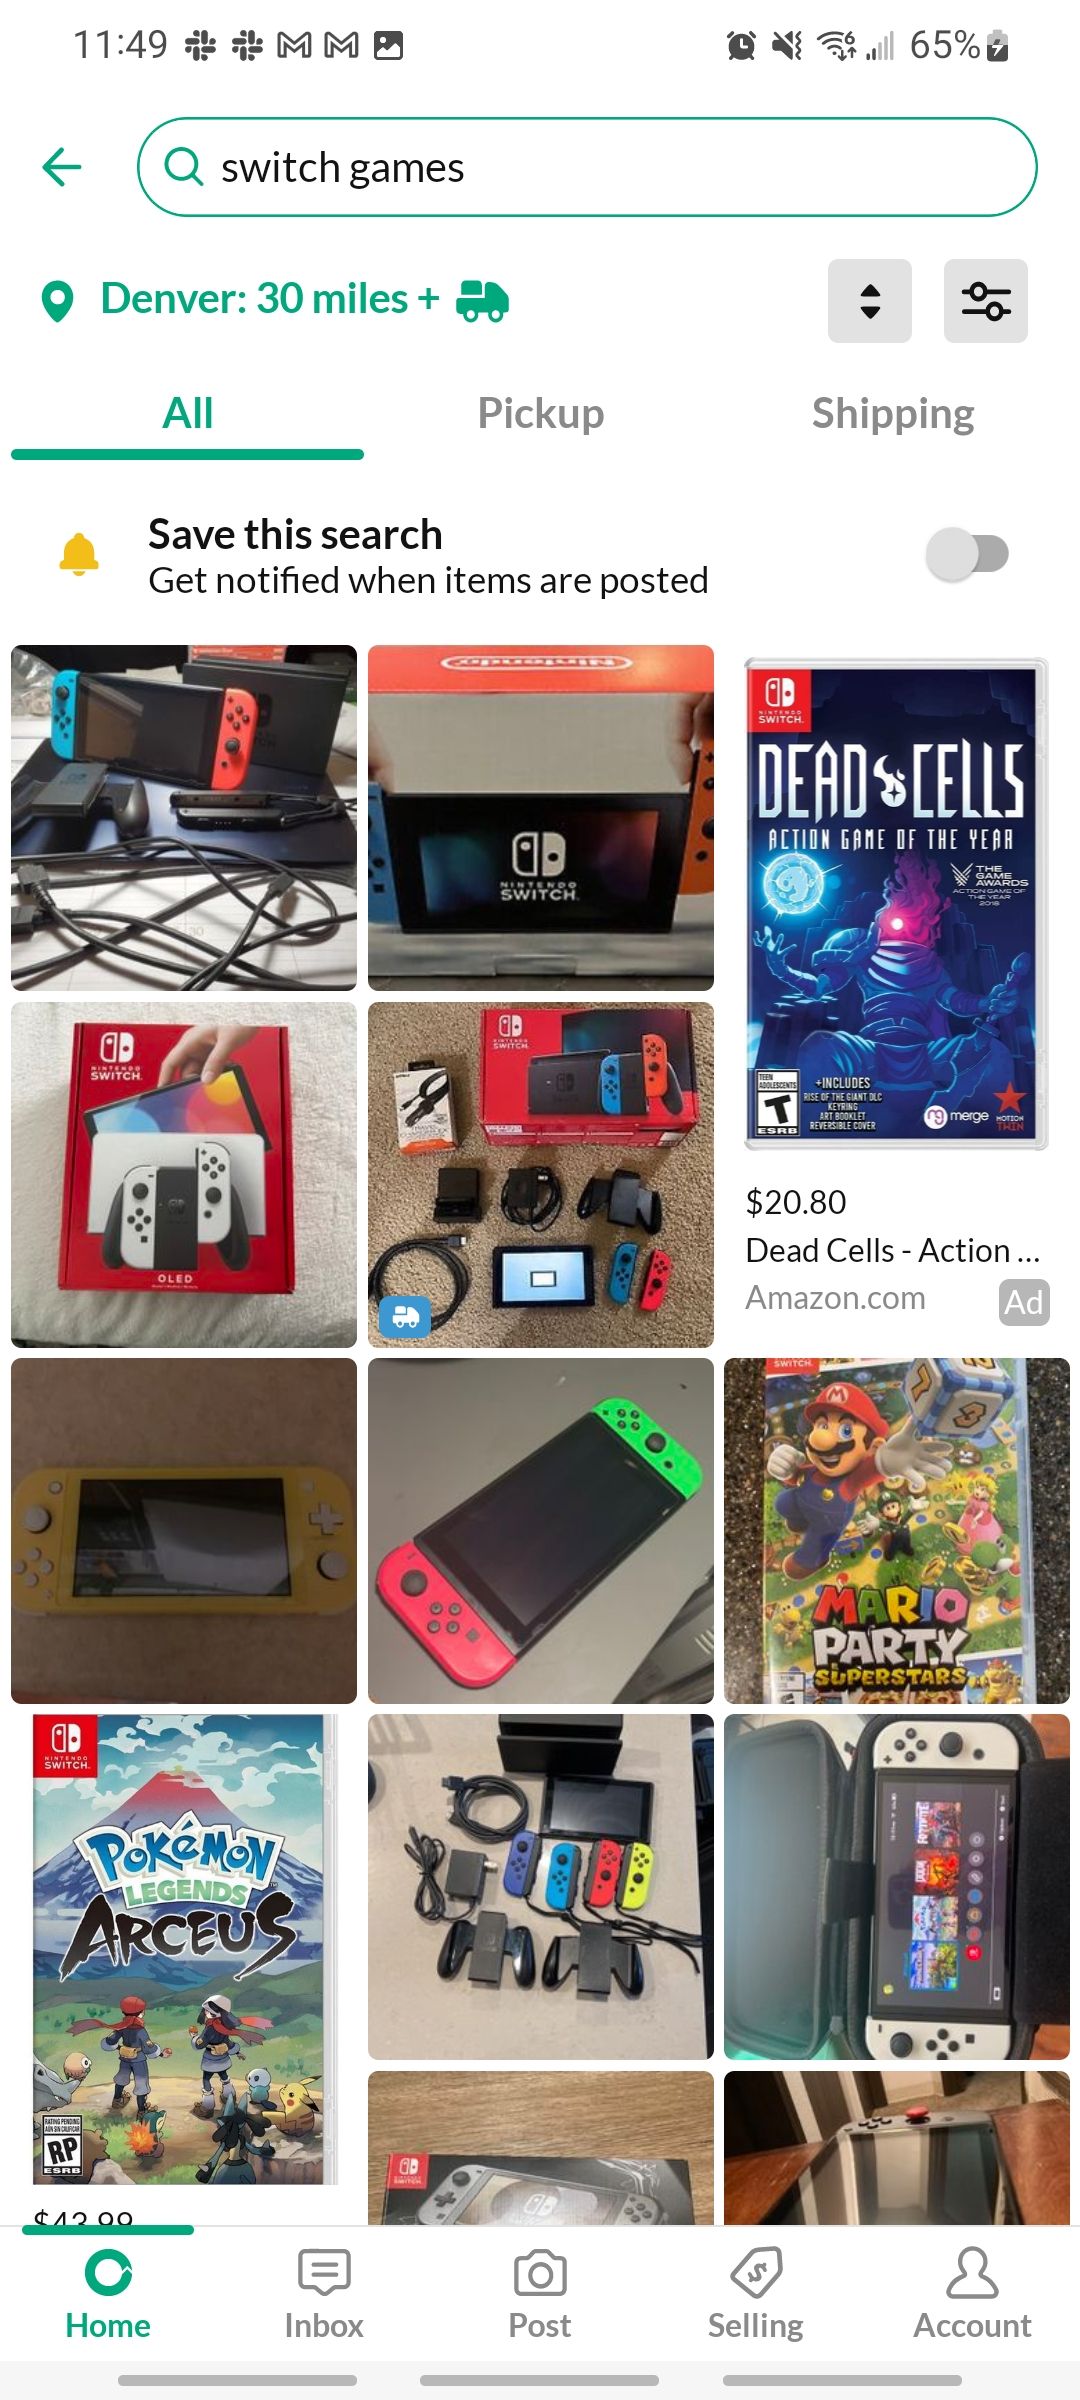 offerup app showing search results for switch games